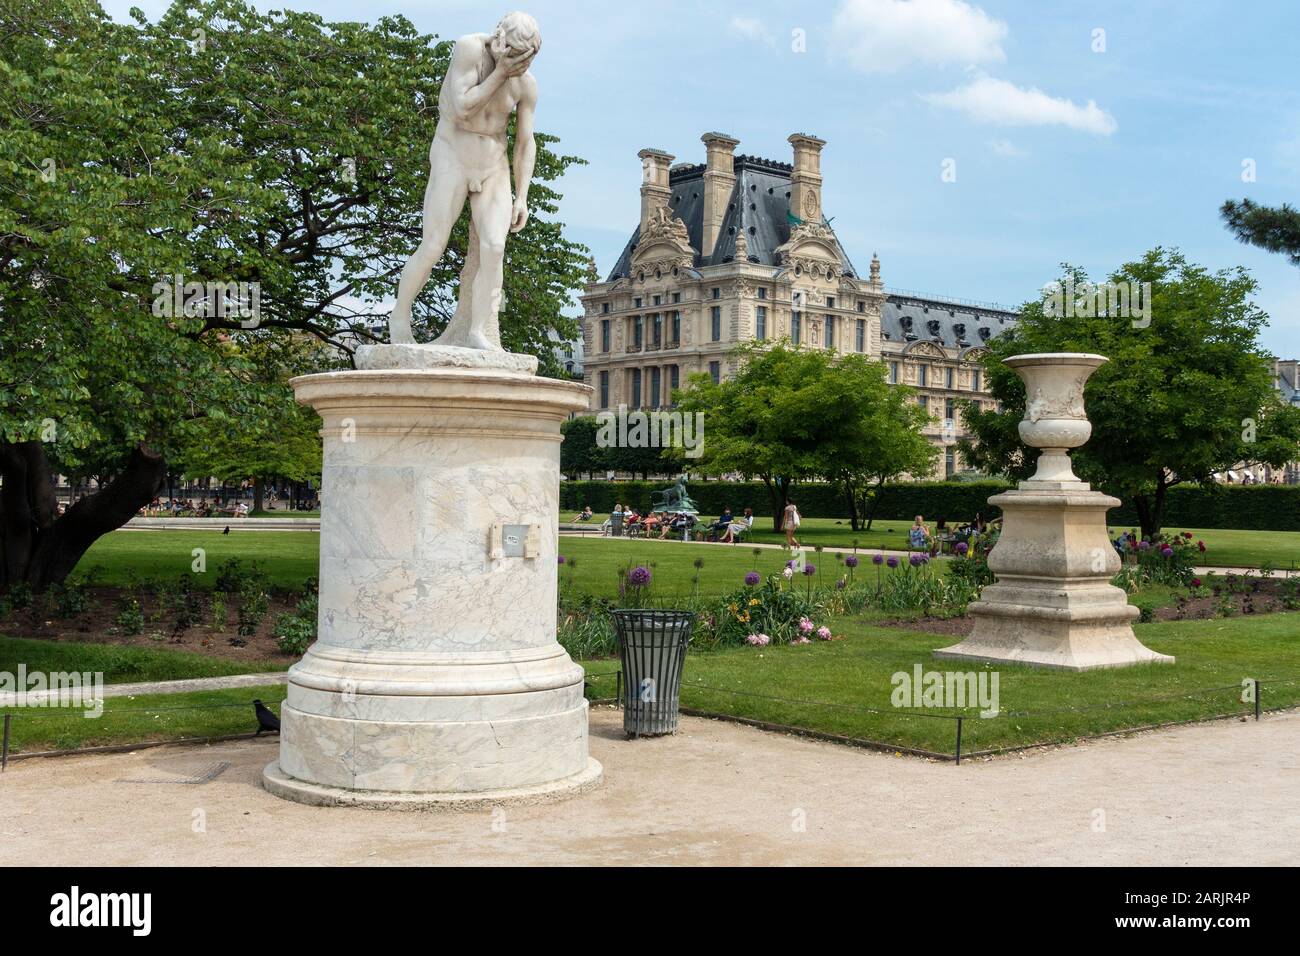 Cain statue in Tuileries Garden (Jardin des Tuileries) with Richelieu Wing of the Louvre Museum in background, Tuileries Quarter, Paris, France Stock Photo